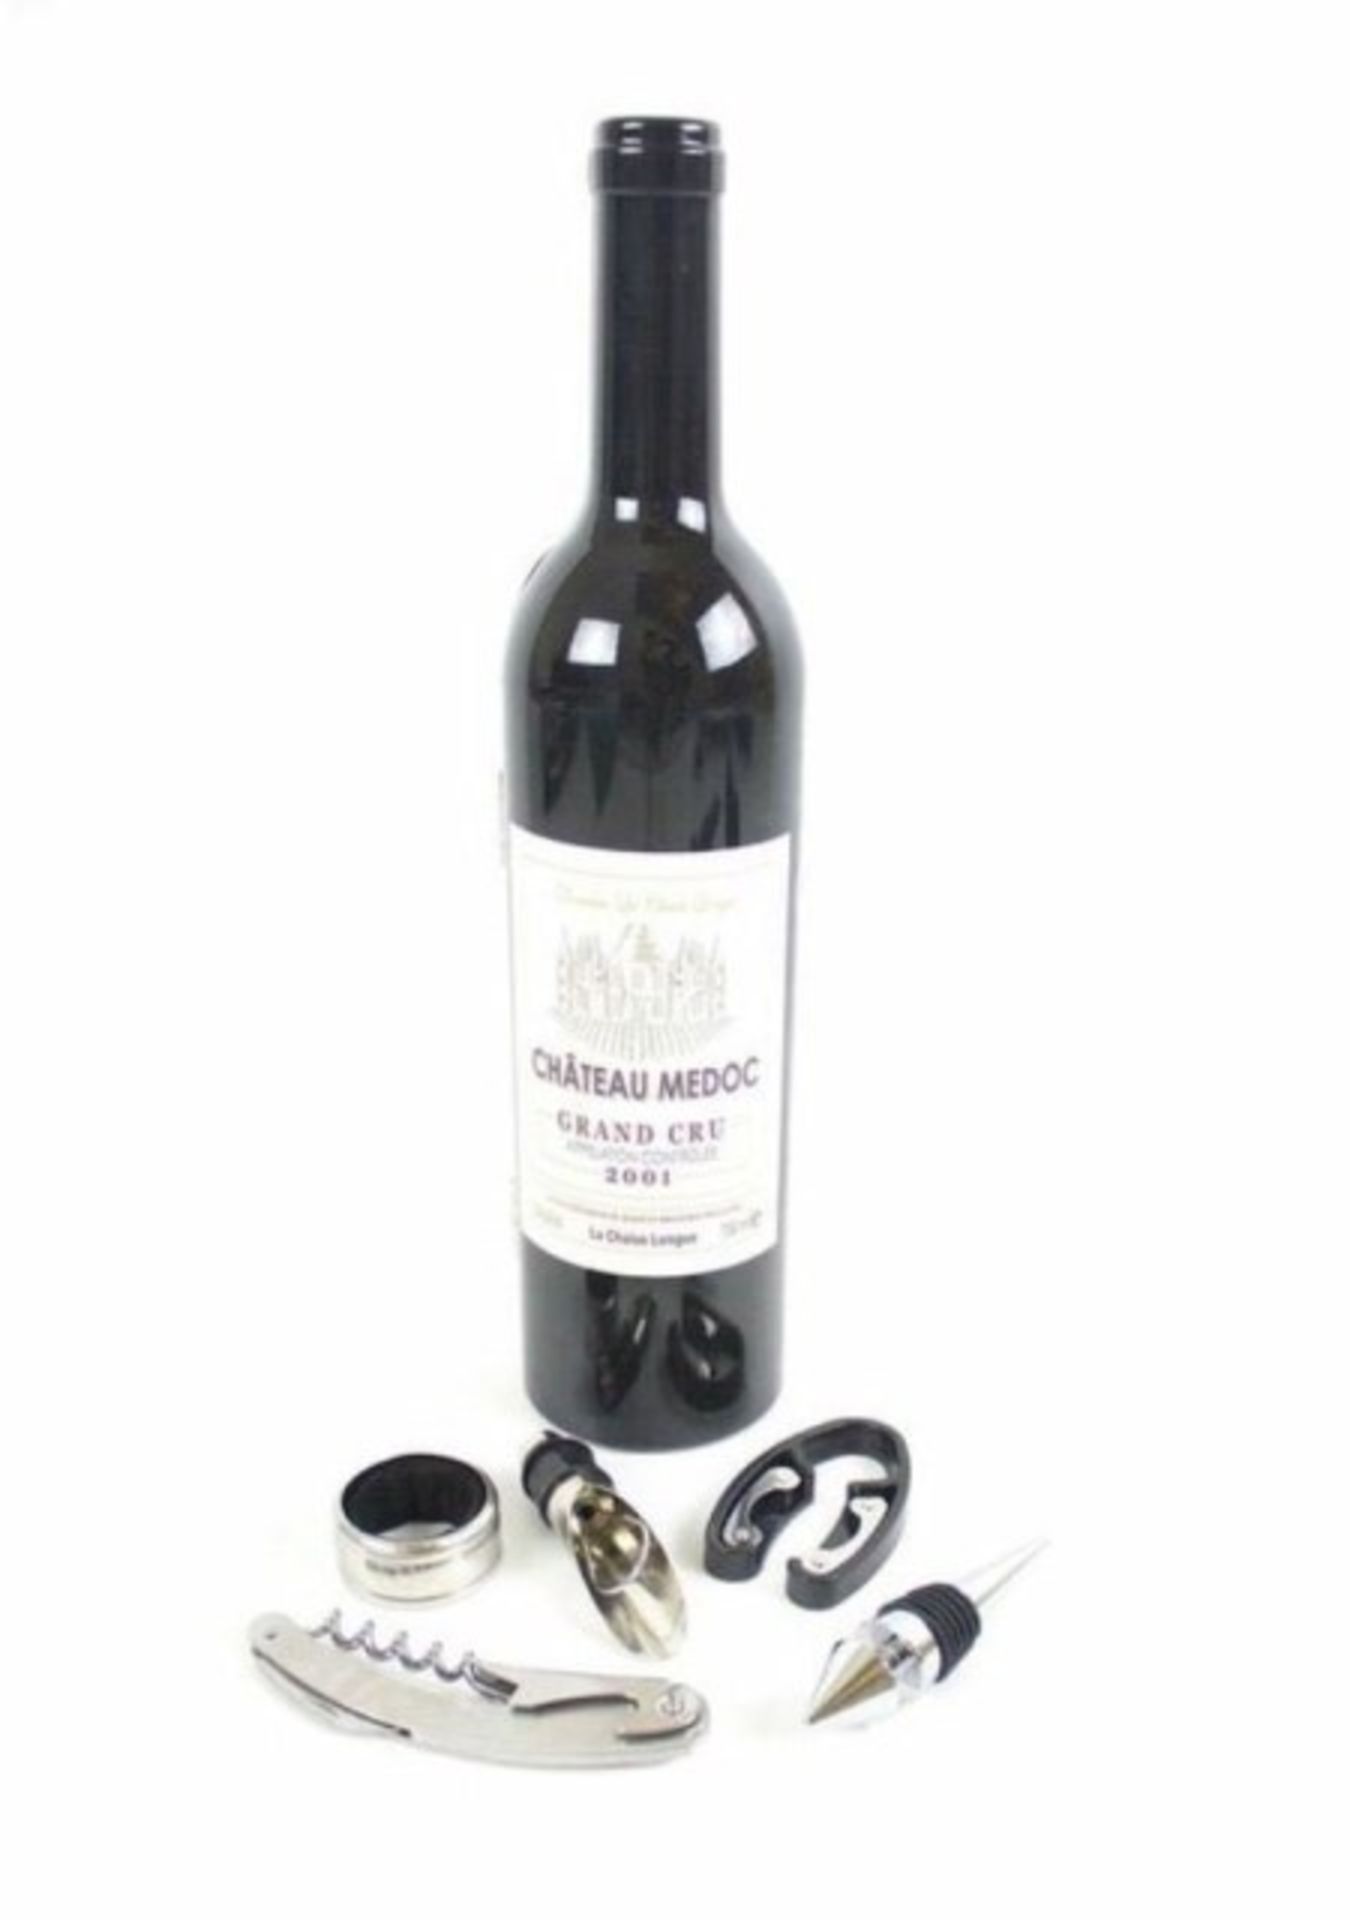 V *TRADE QTY* Brand New Boxed Wine Connoisseurs Gift Set X 8 YOUR BID PRICE TO BE MULTIPLIED BY